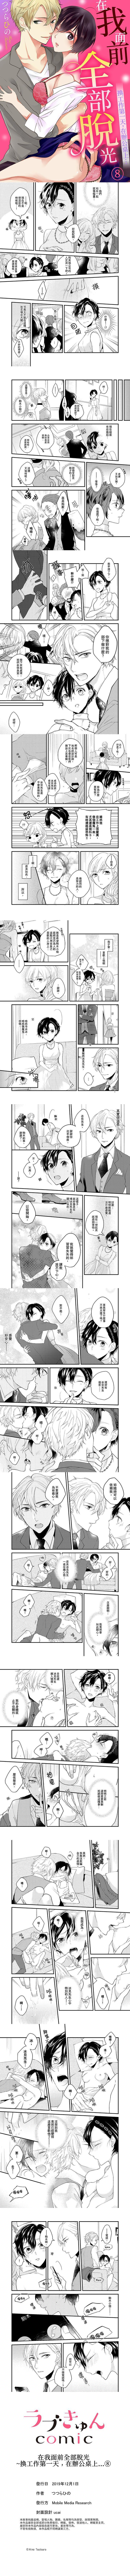 Head 在我面前全部脫光 1-12 All Natural - Page 8